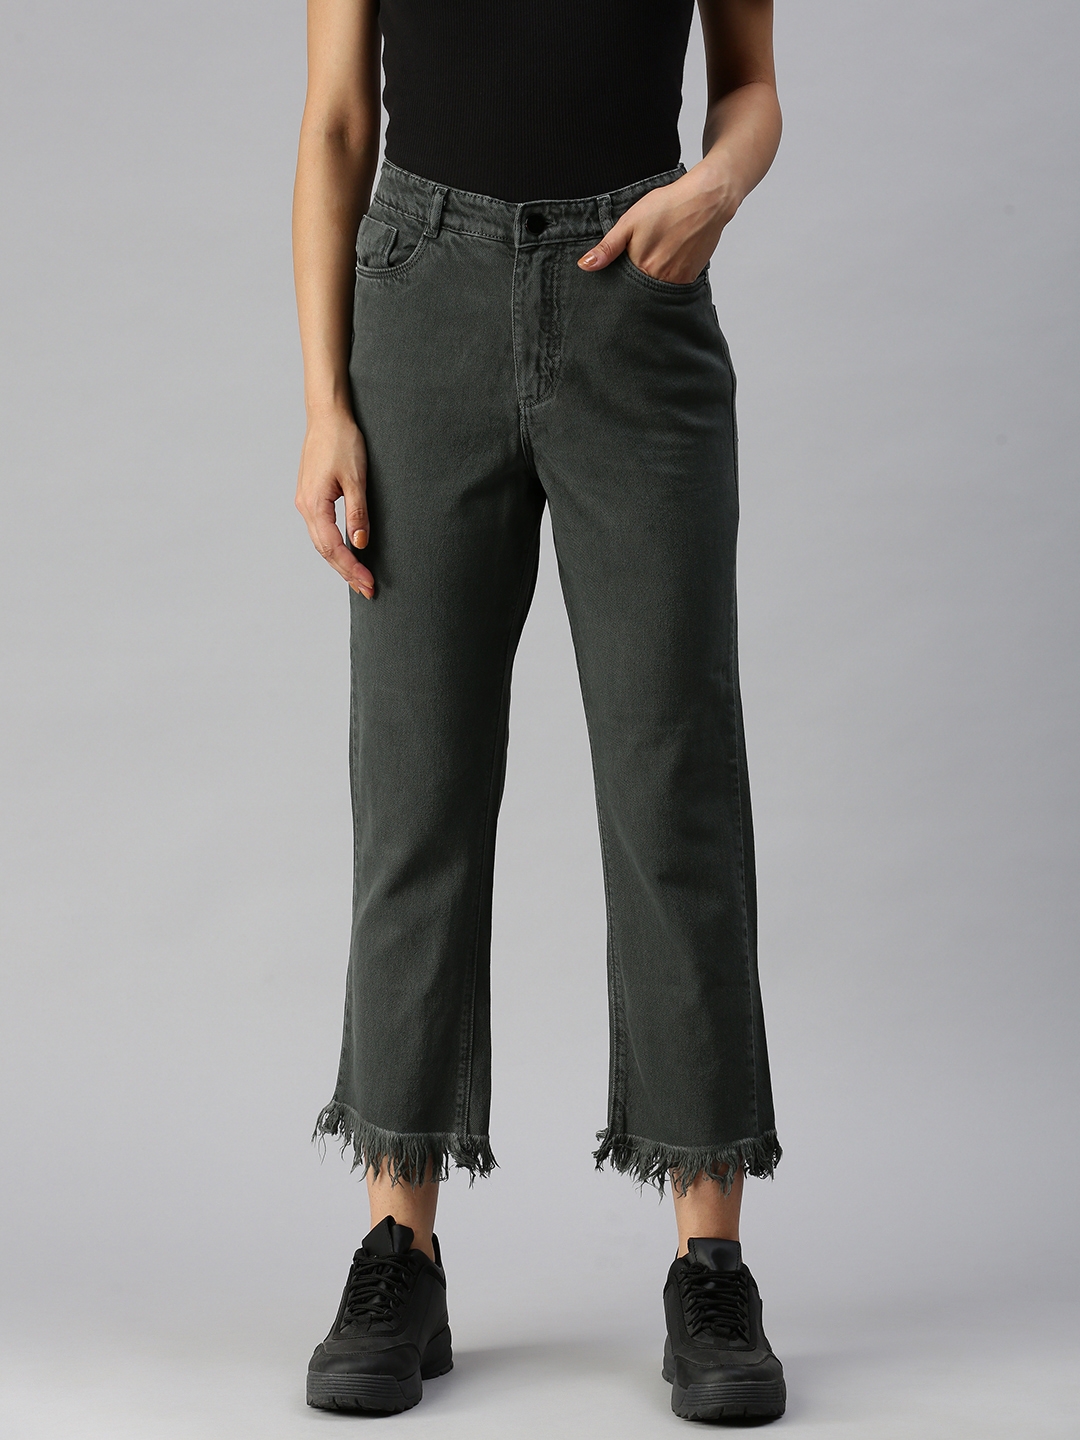 Women's Green Cotton Solid Jeans